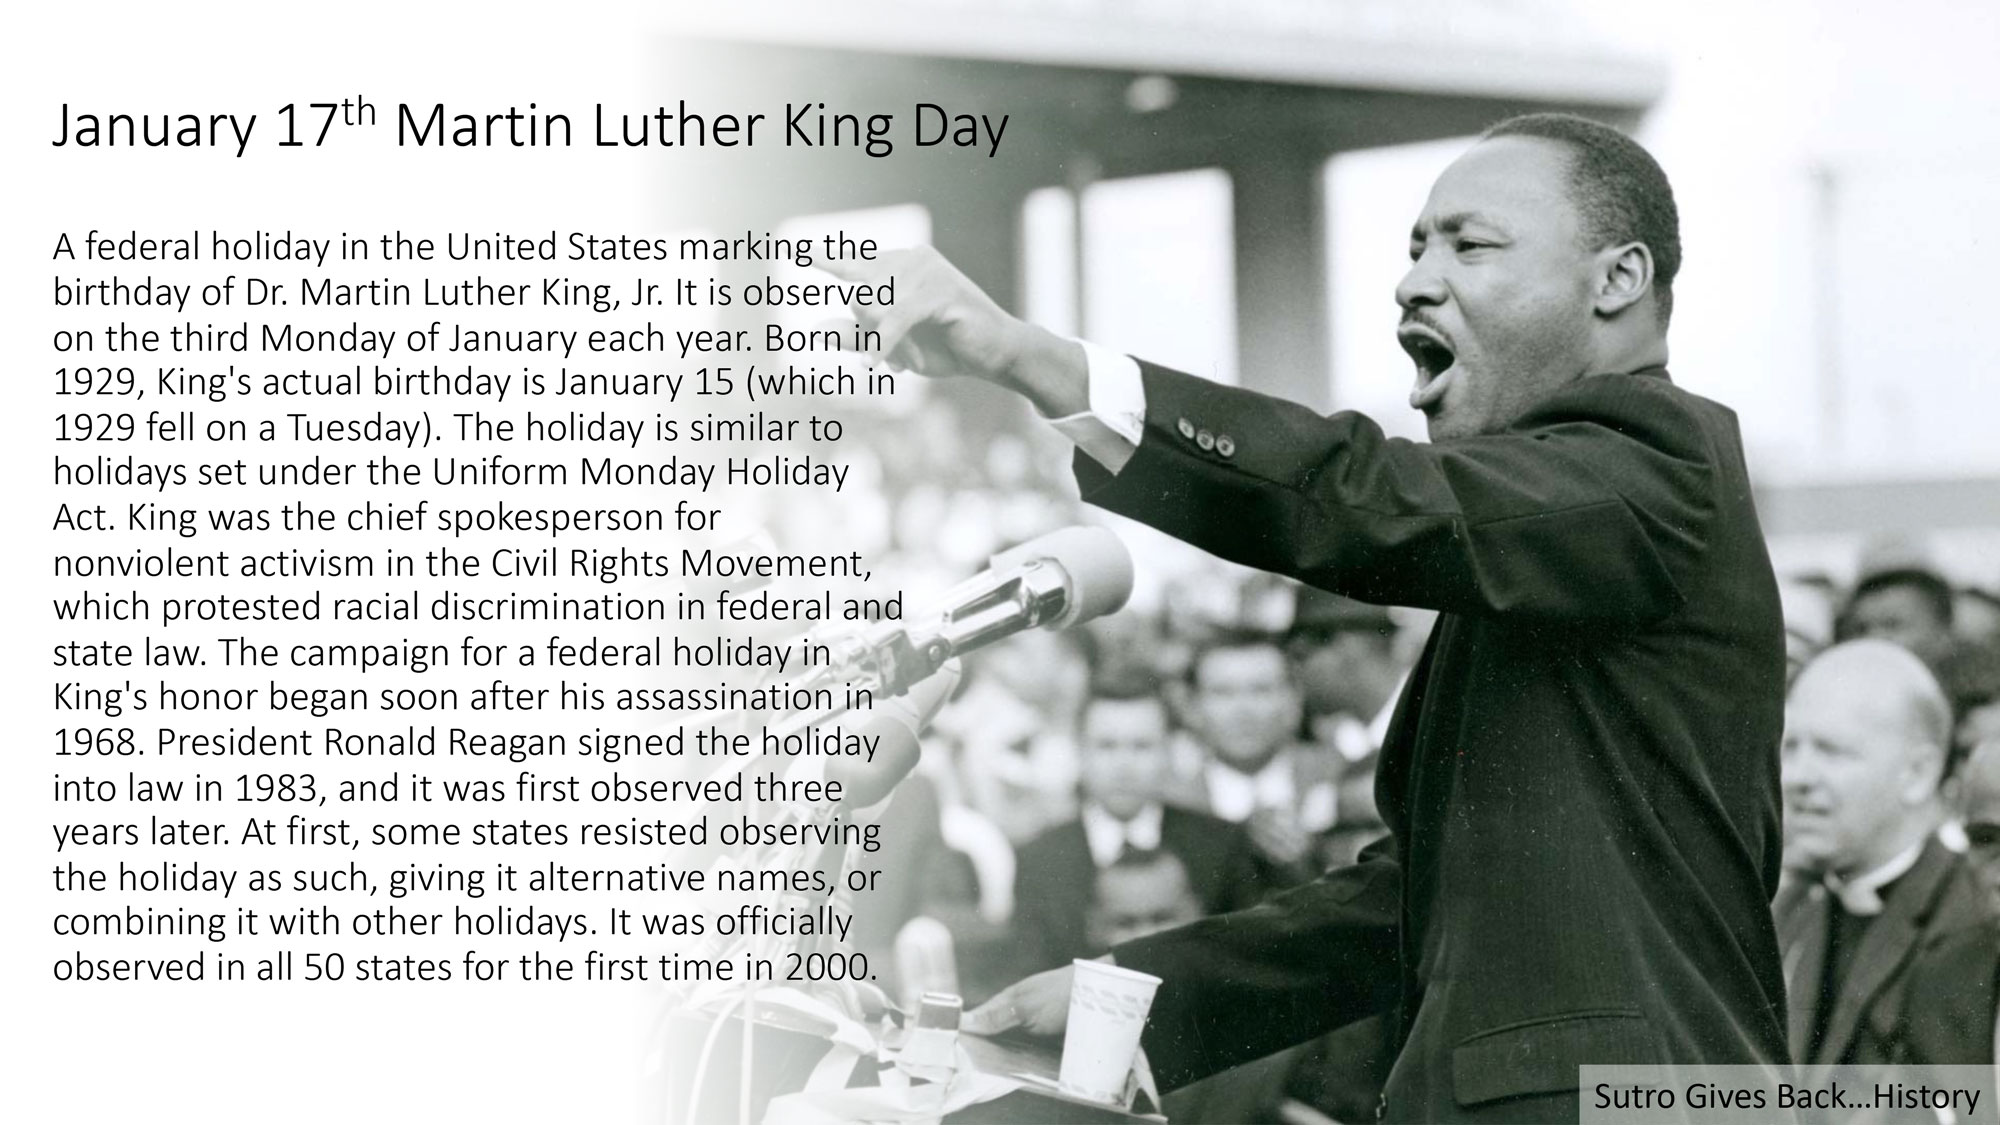 January 17th Martin Luther King Day